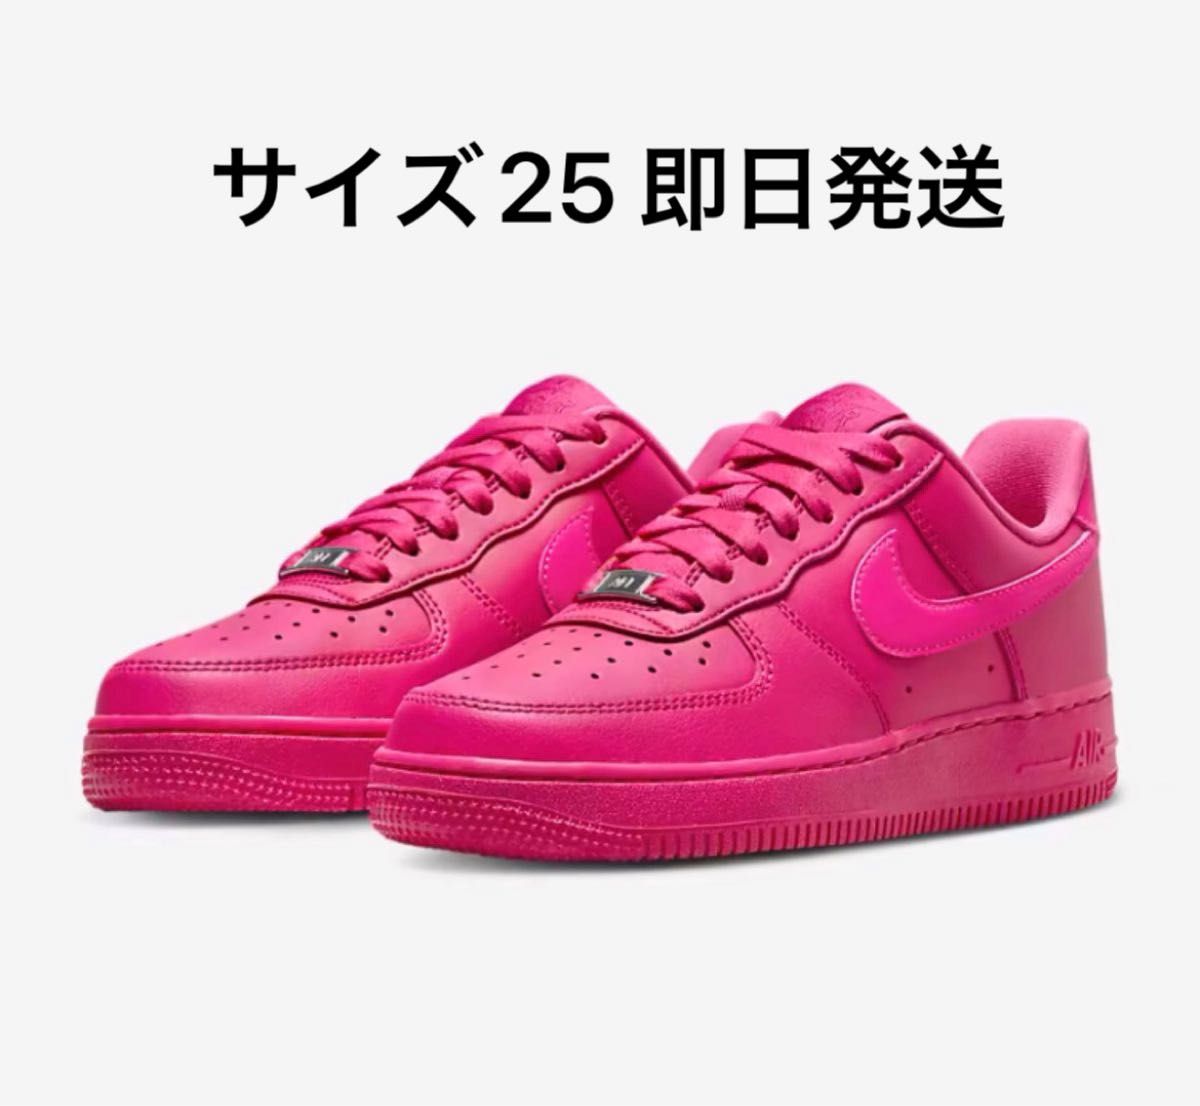 Nike WMNS Air Force 1 Low Fireberry 25 Yahoo!フリマ（旧）-